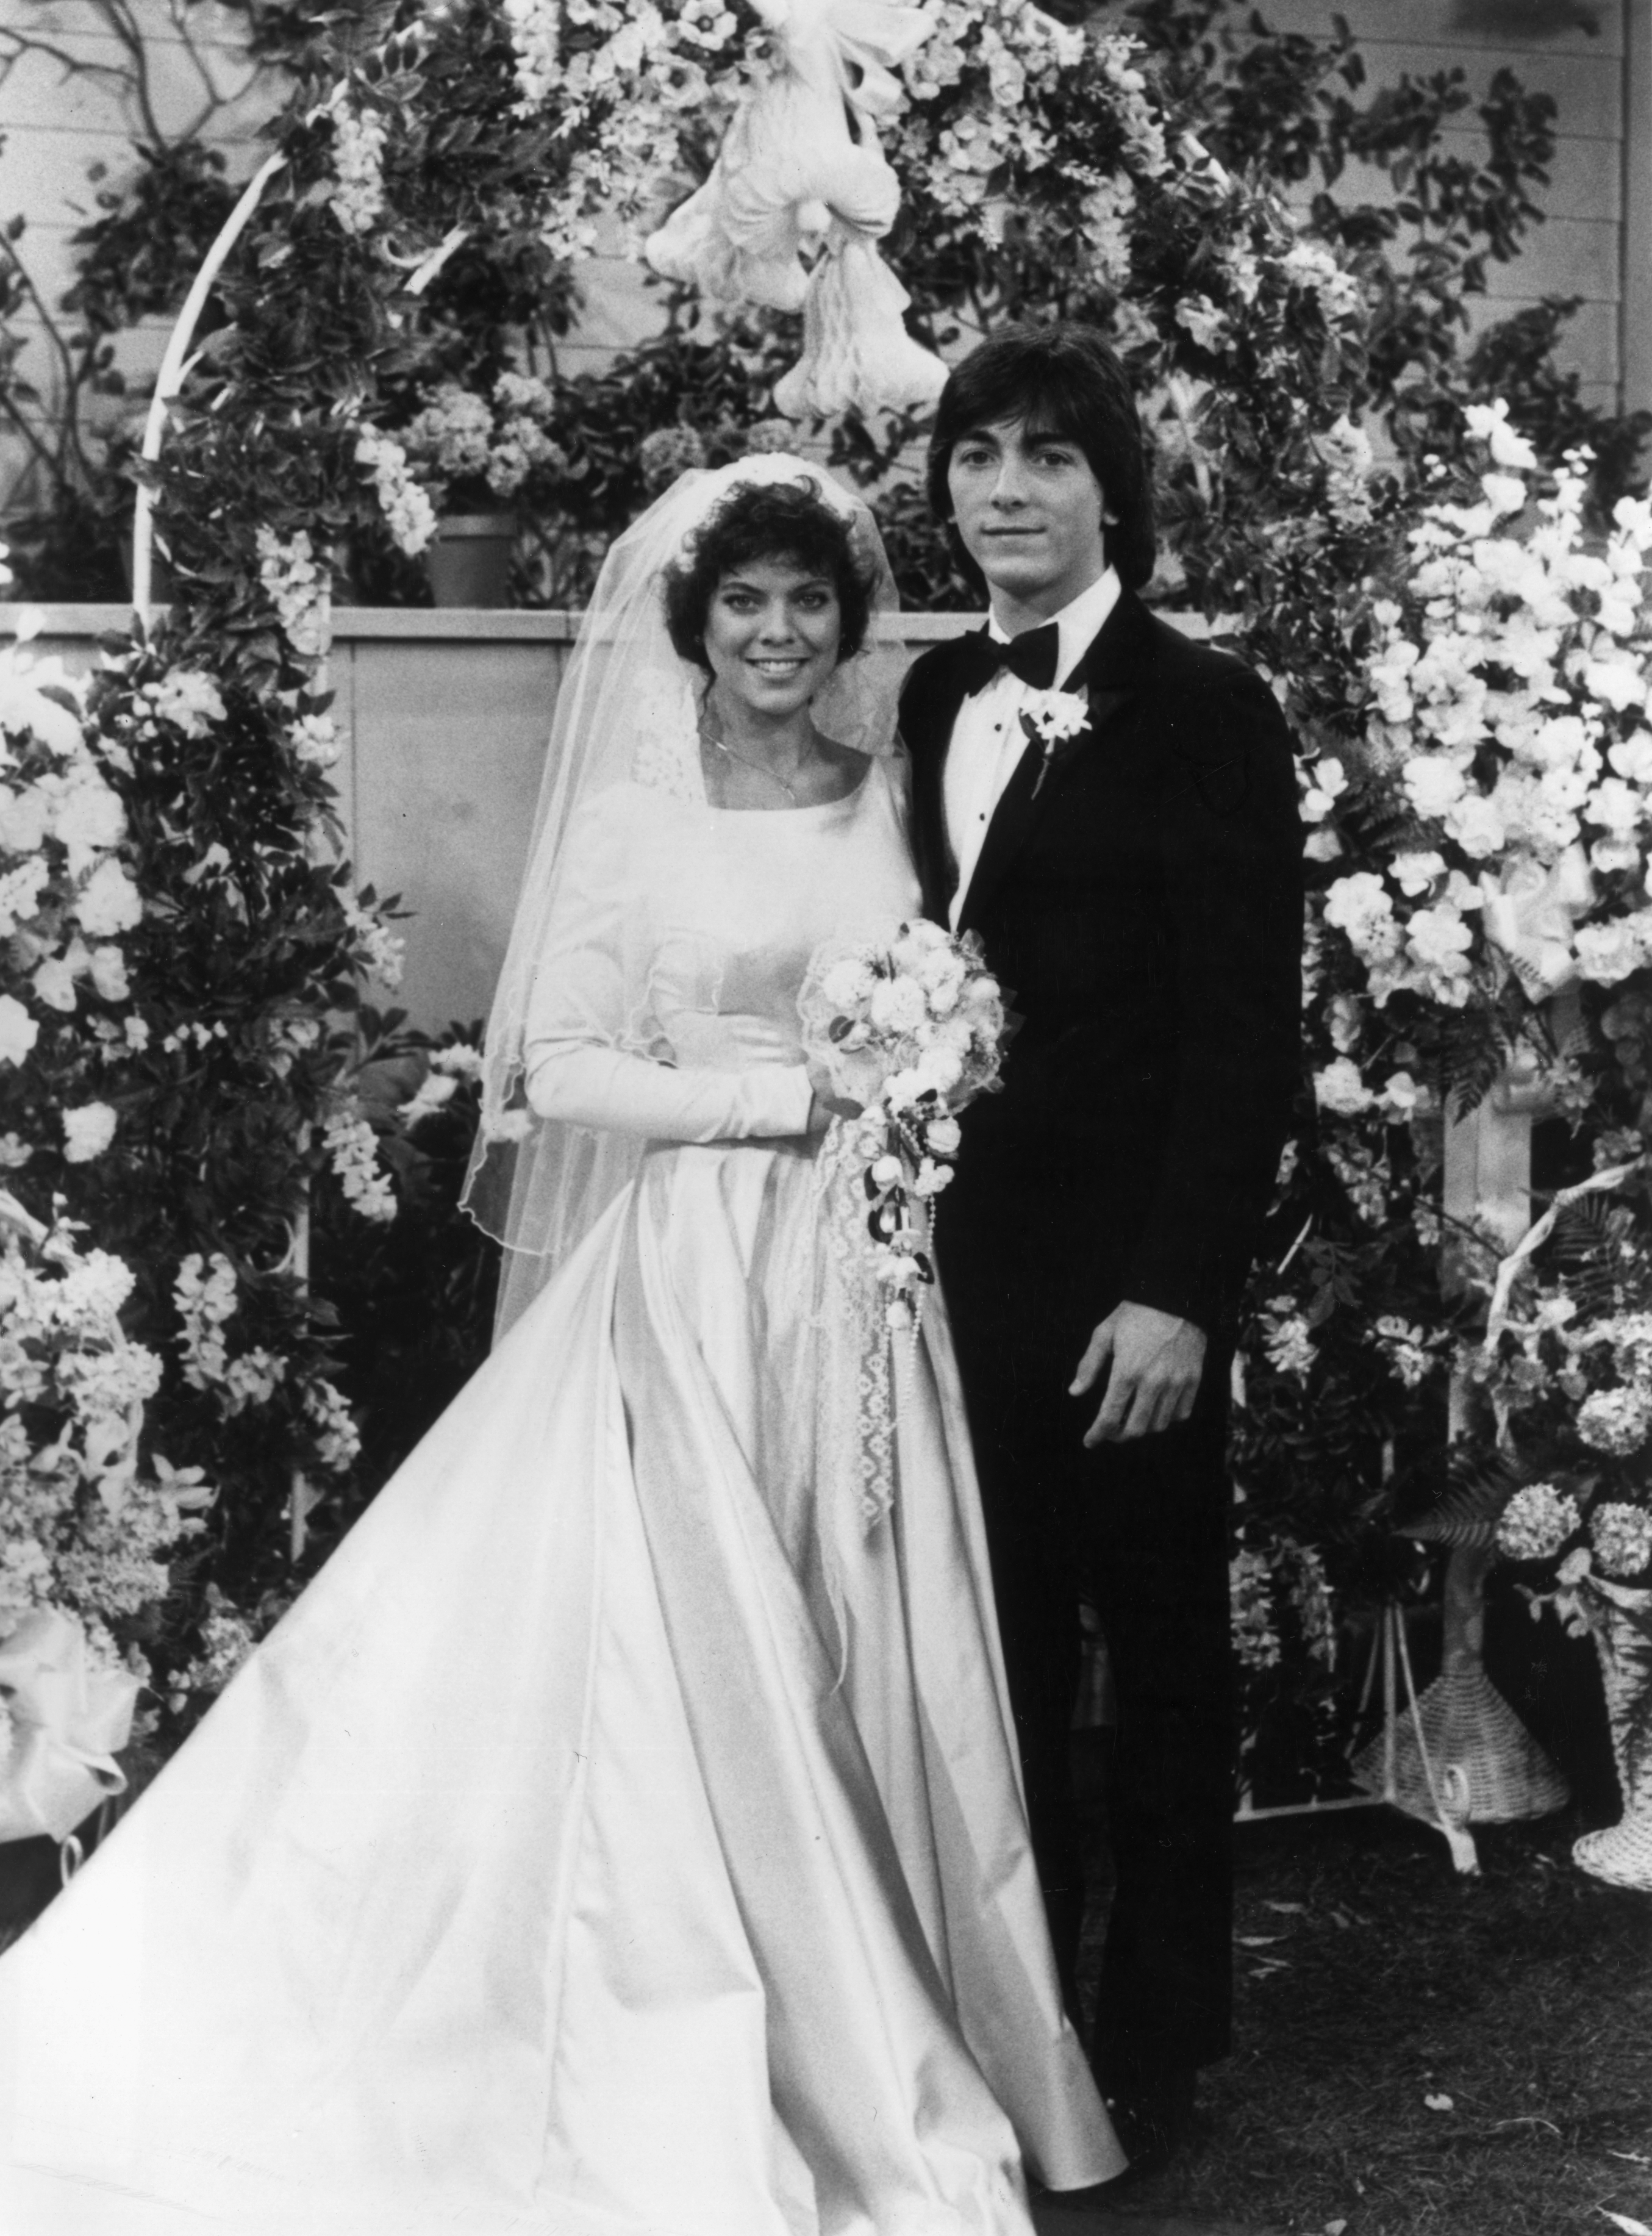 American actors Erin Moran and Scott Baio on the set of "Happy Days" September 1,1979 | Source: Getty Images